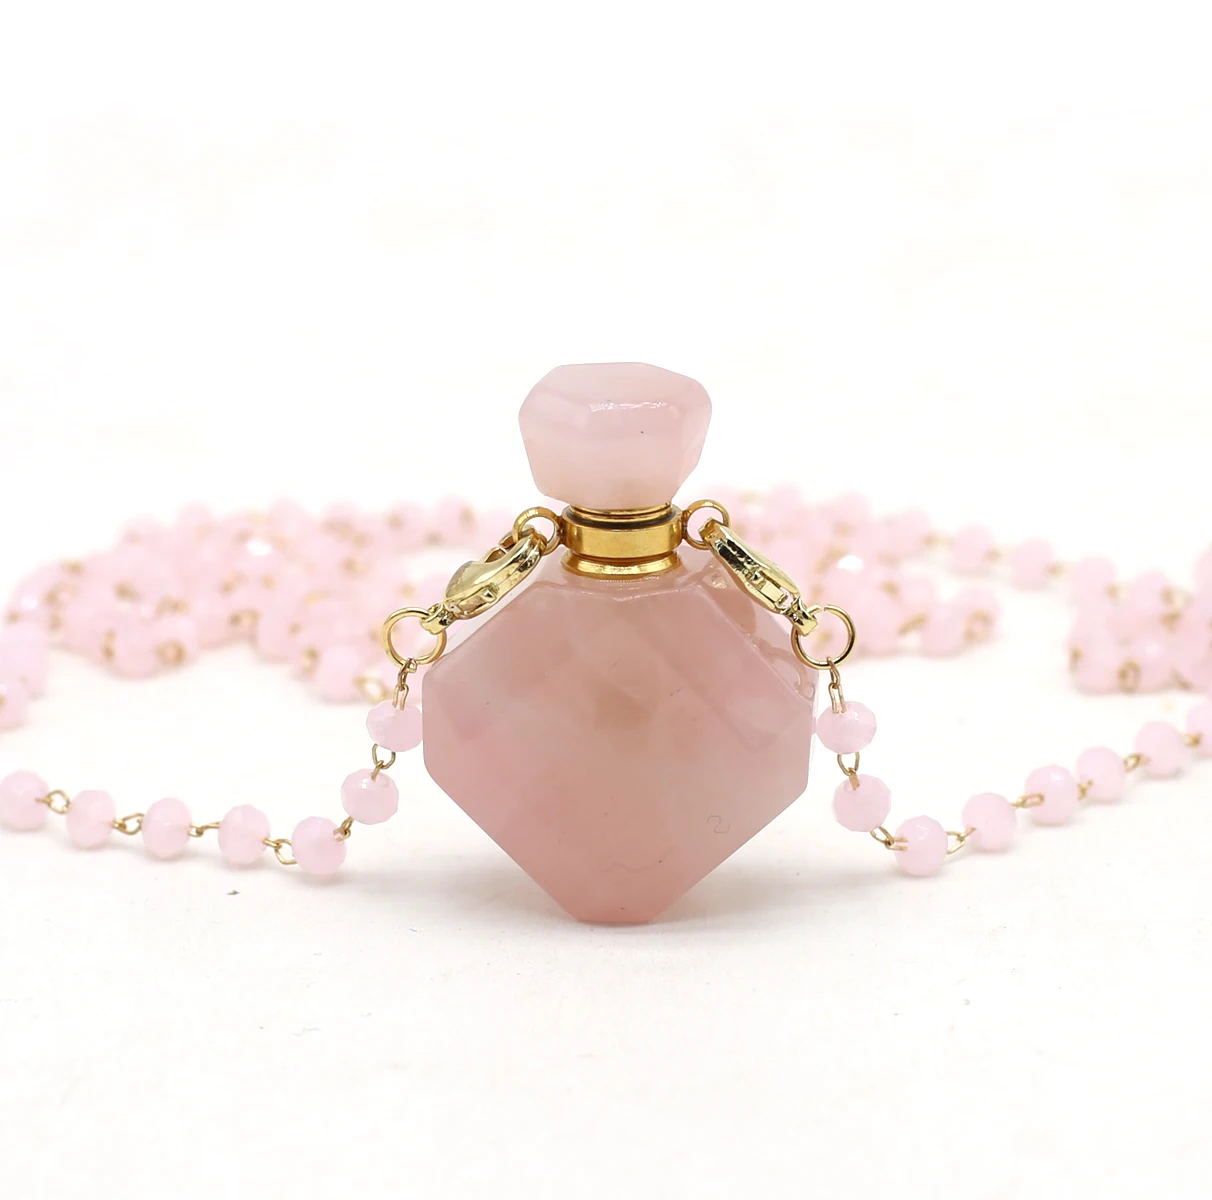 

Natural Stones Pink Crystal Rose Quartz Perfume Bottle Pendants with Chain Necklaces for Women Wedding Jewelry Gifts Wholesale